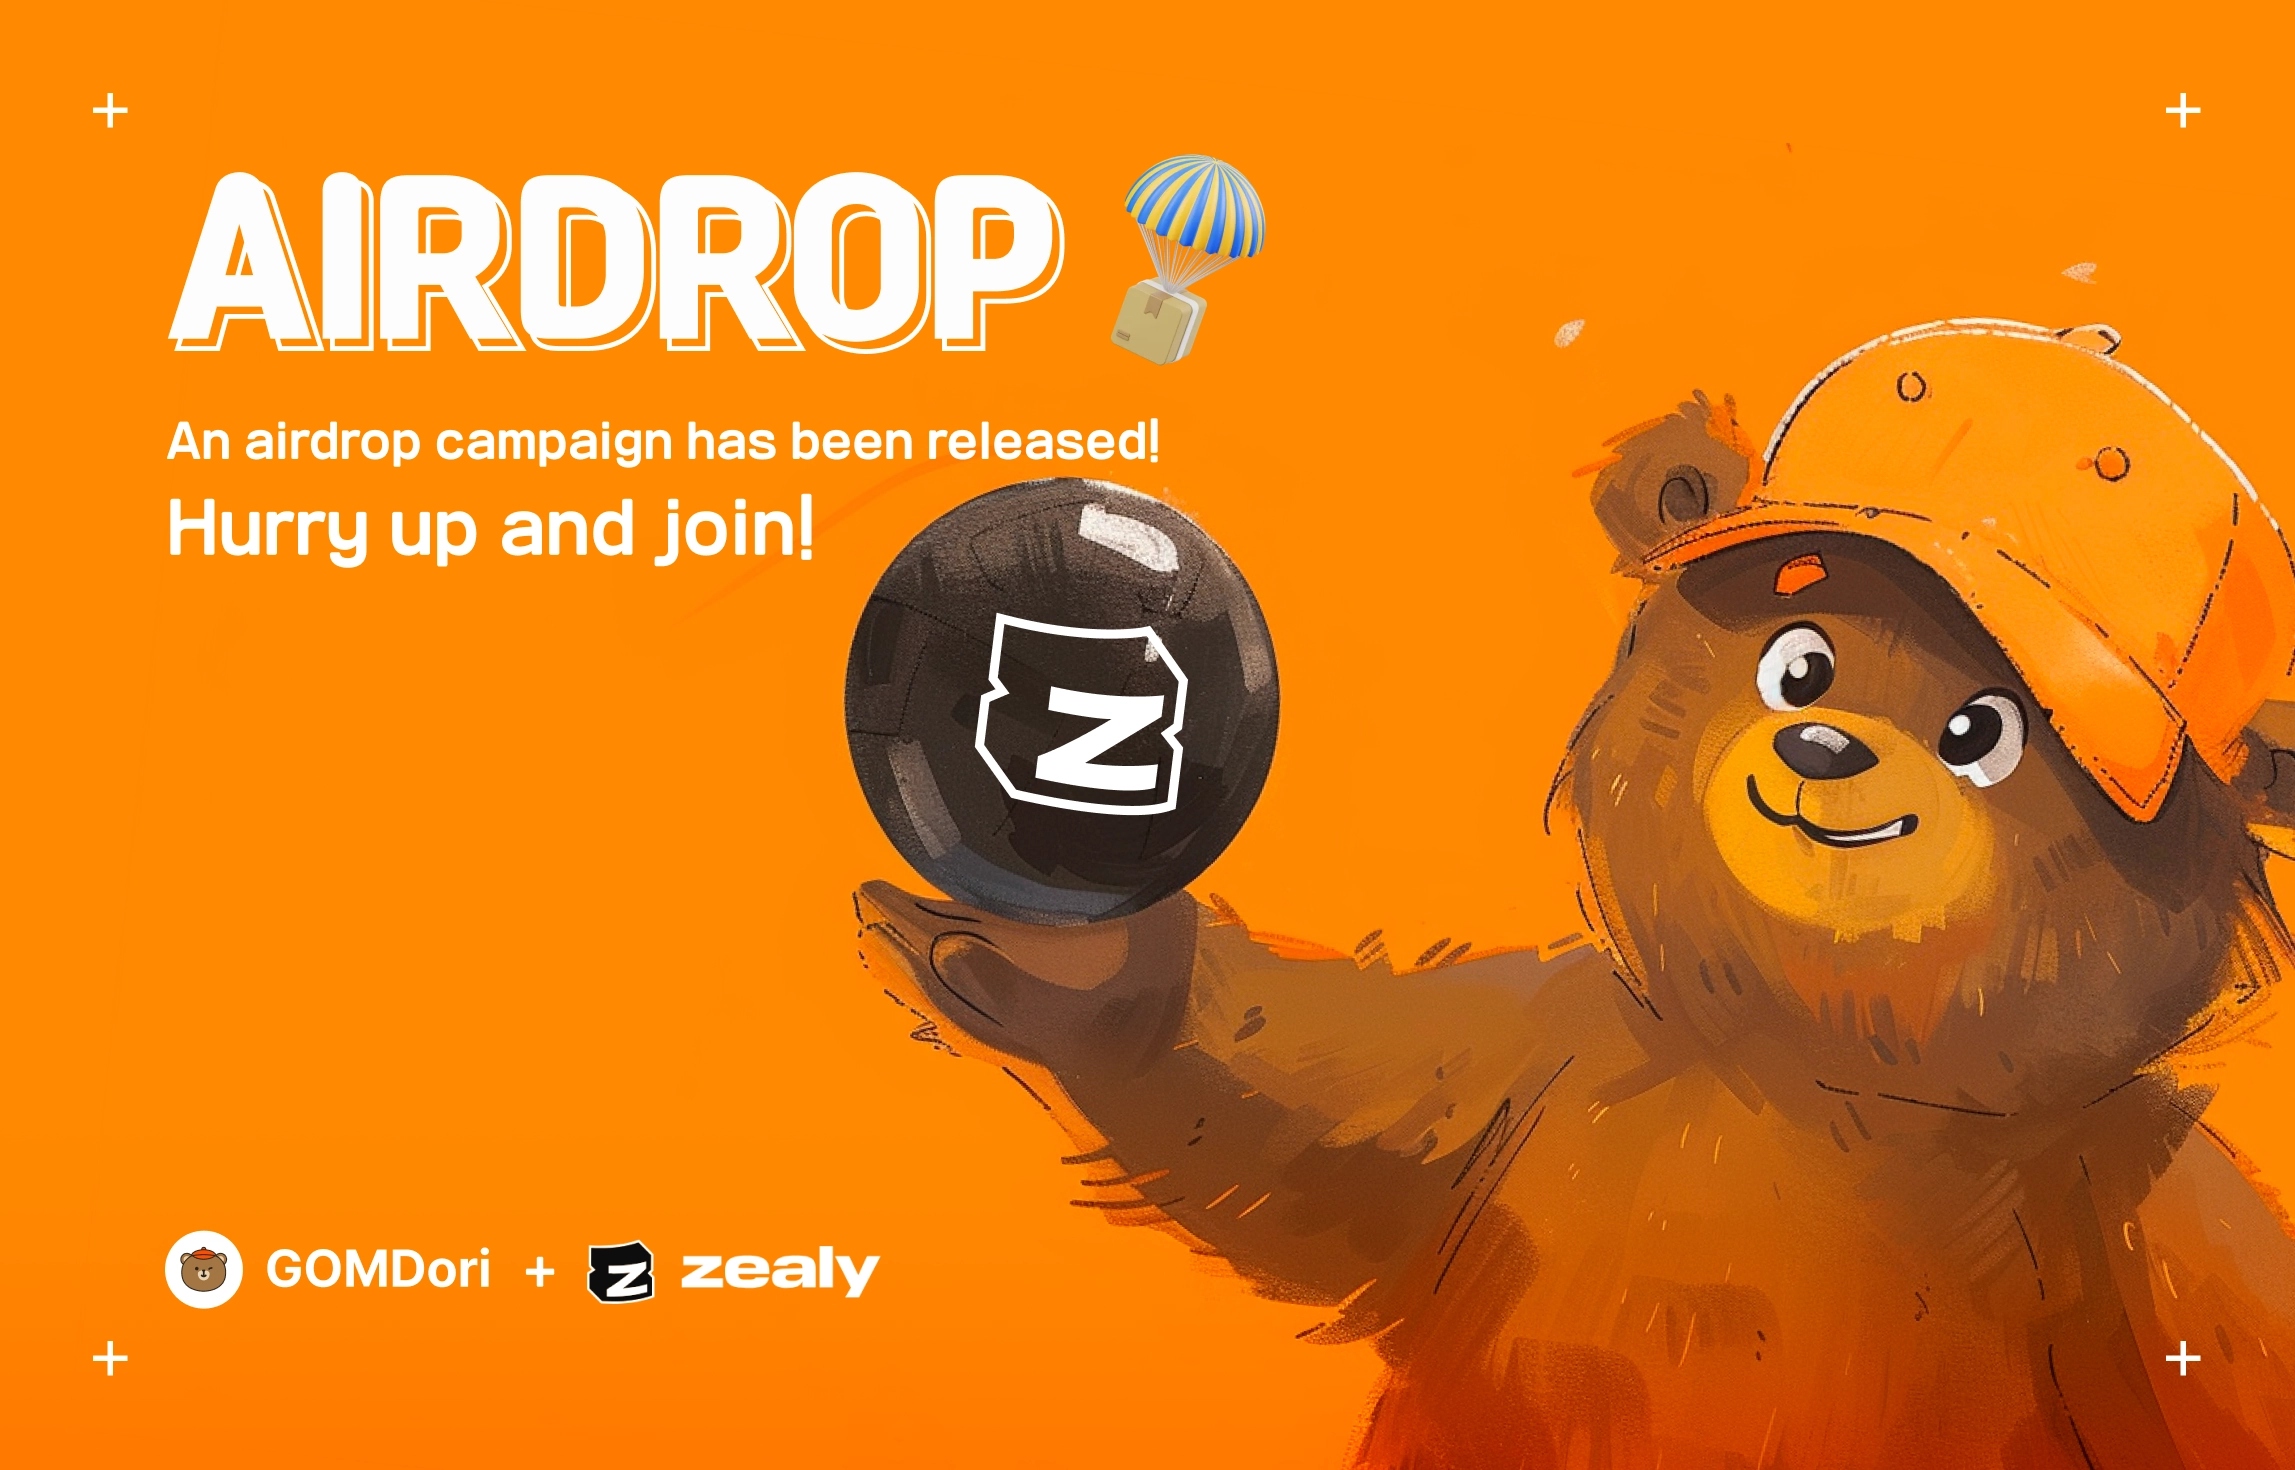 The First Airdrop of $GOMD has been opened on Zealy !!